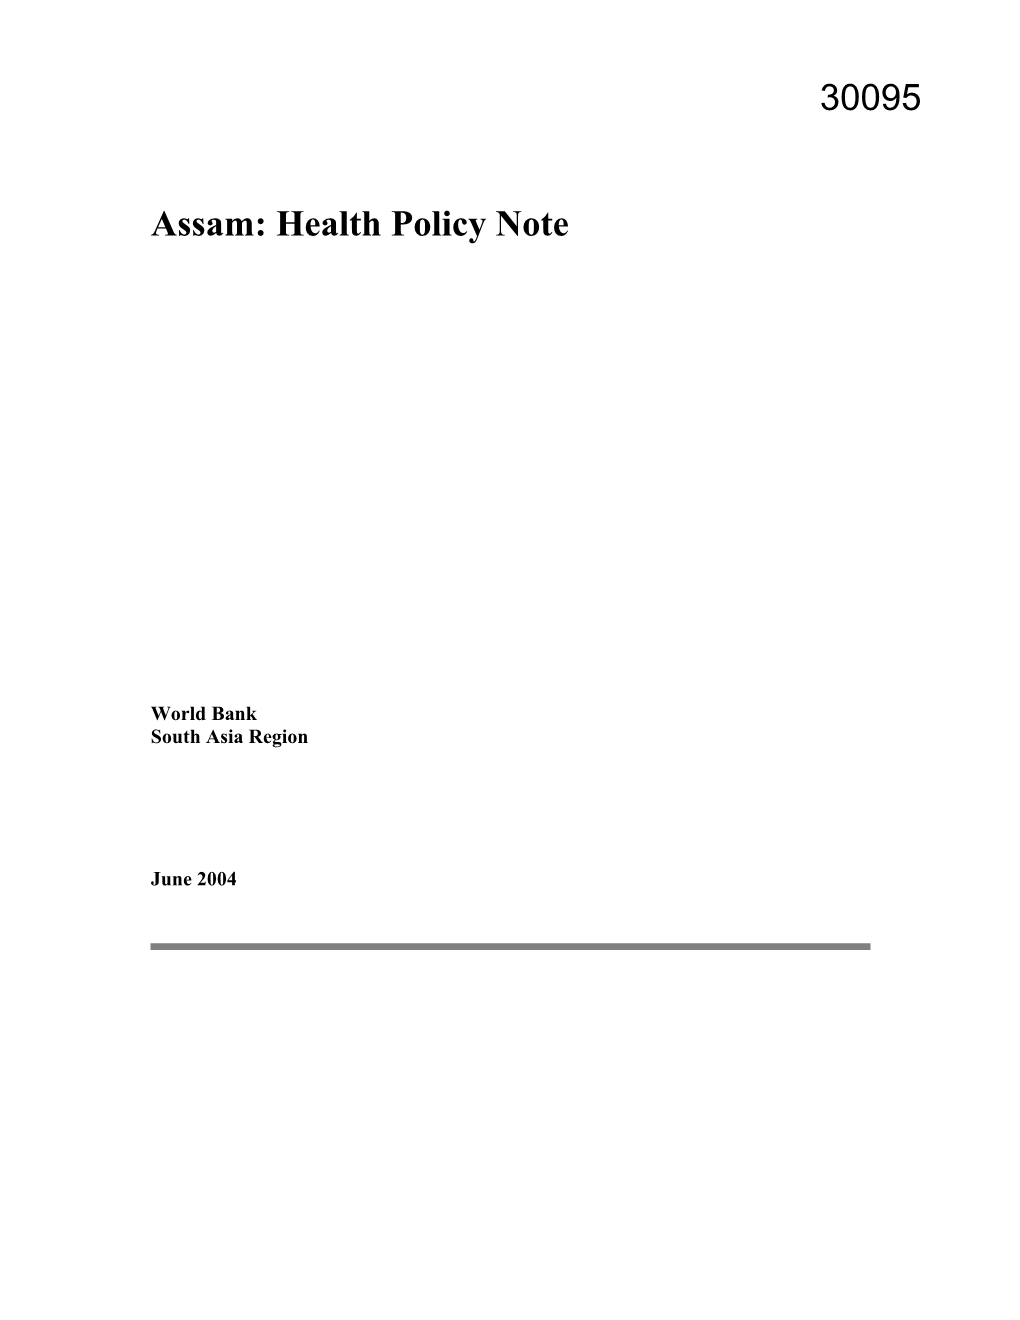 Assam: Health Policy Note